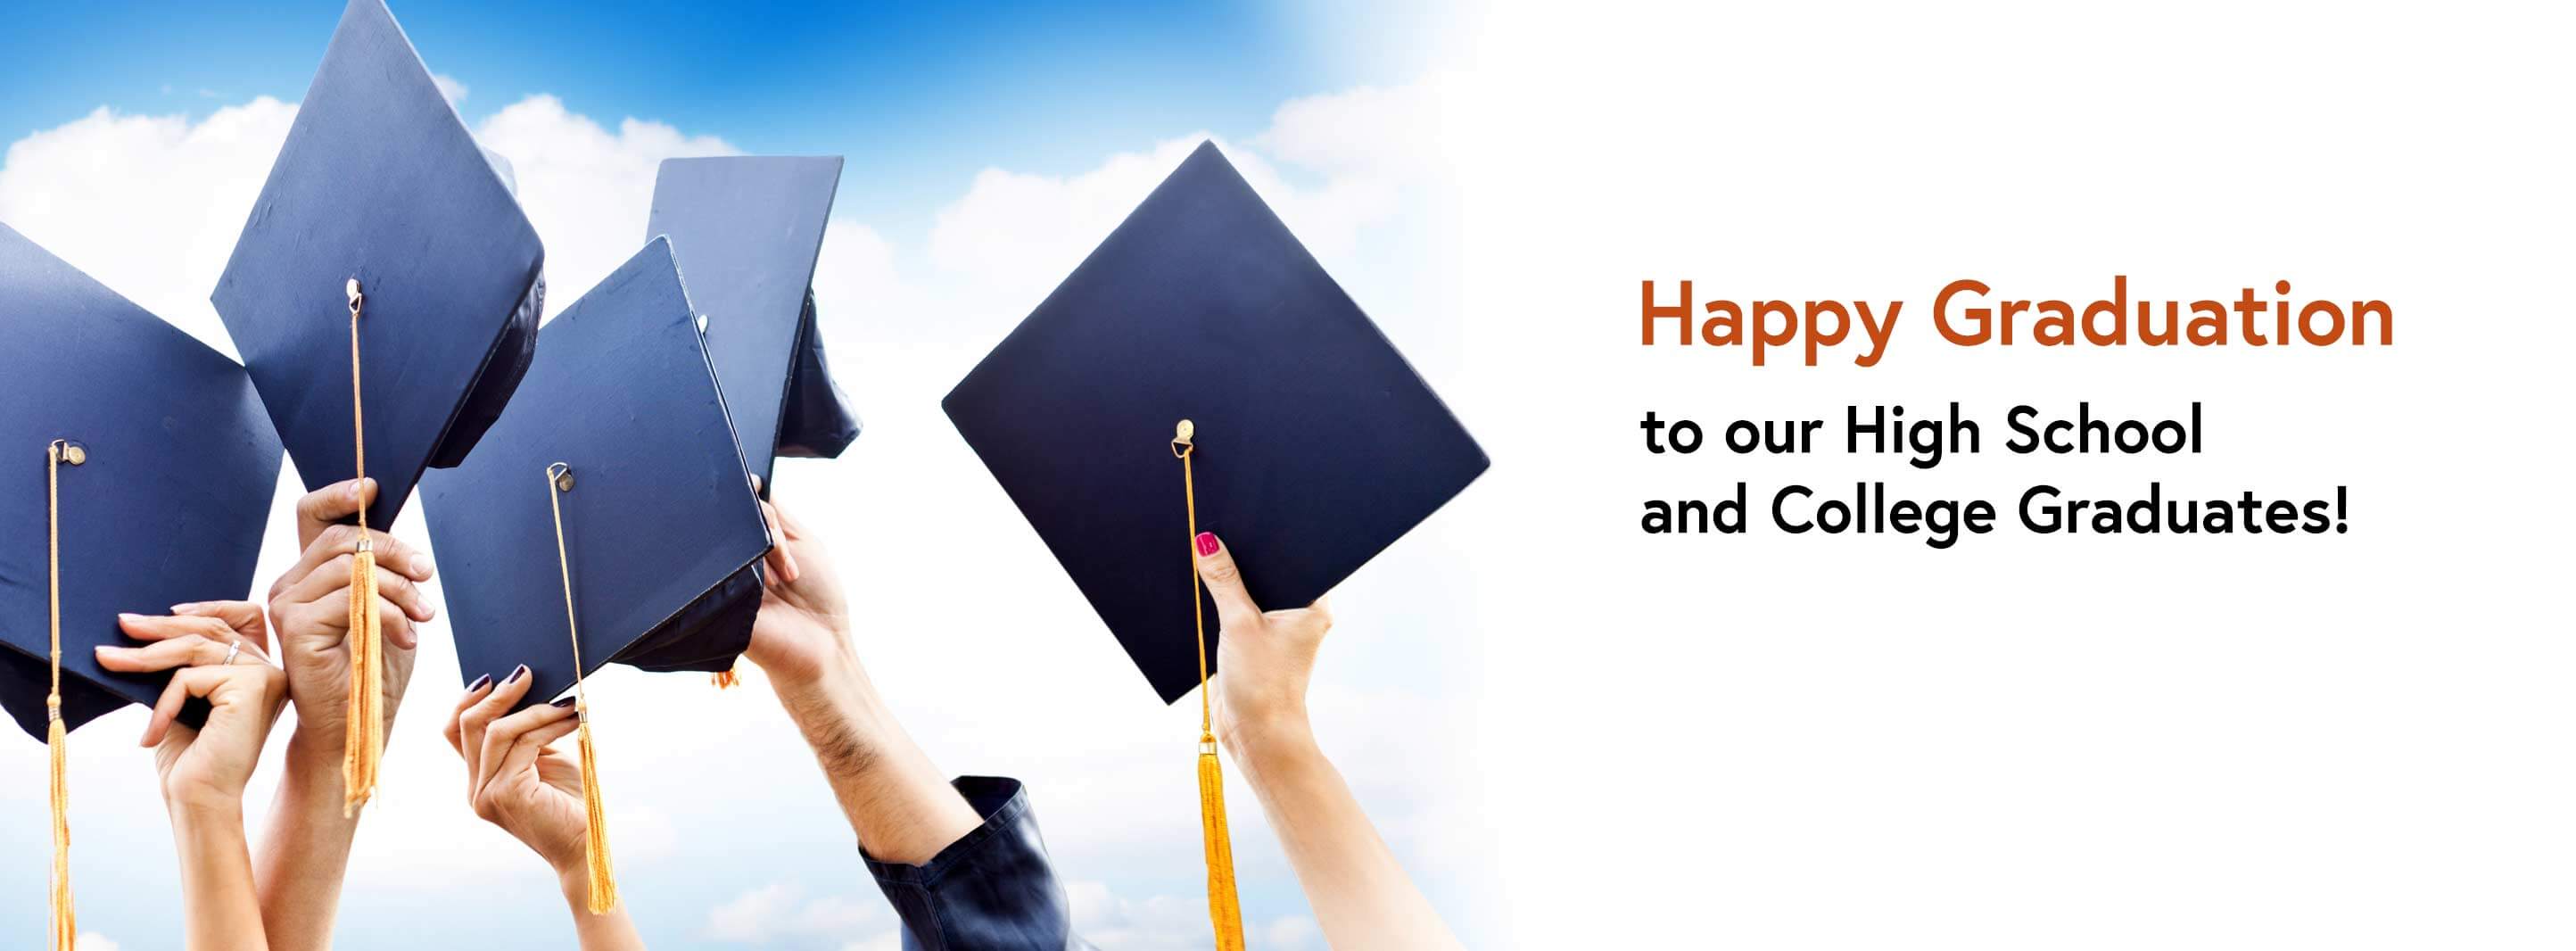 Happy Graduation to our high school and college graduates!